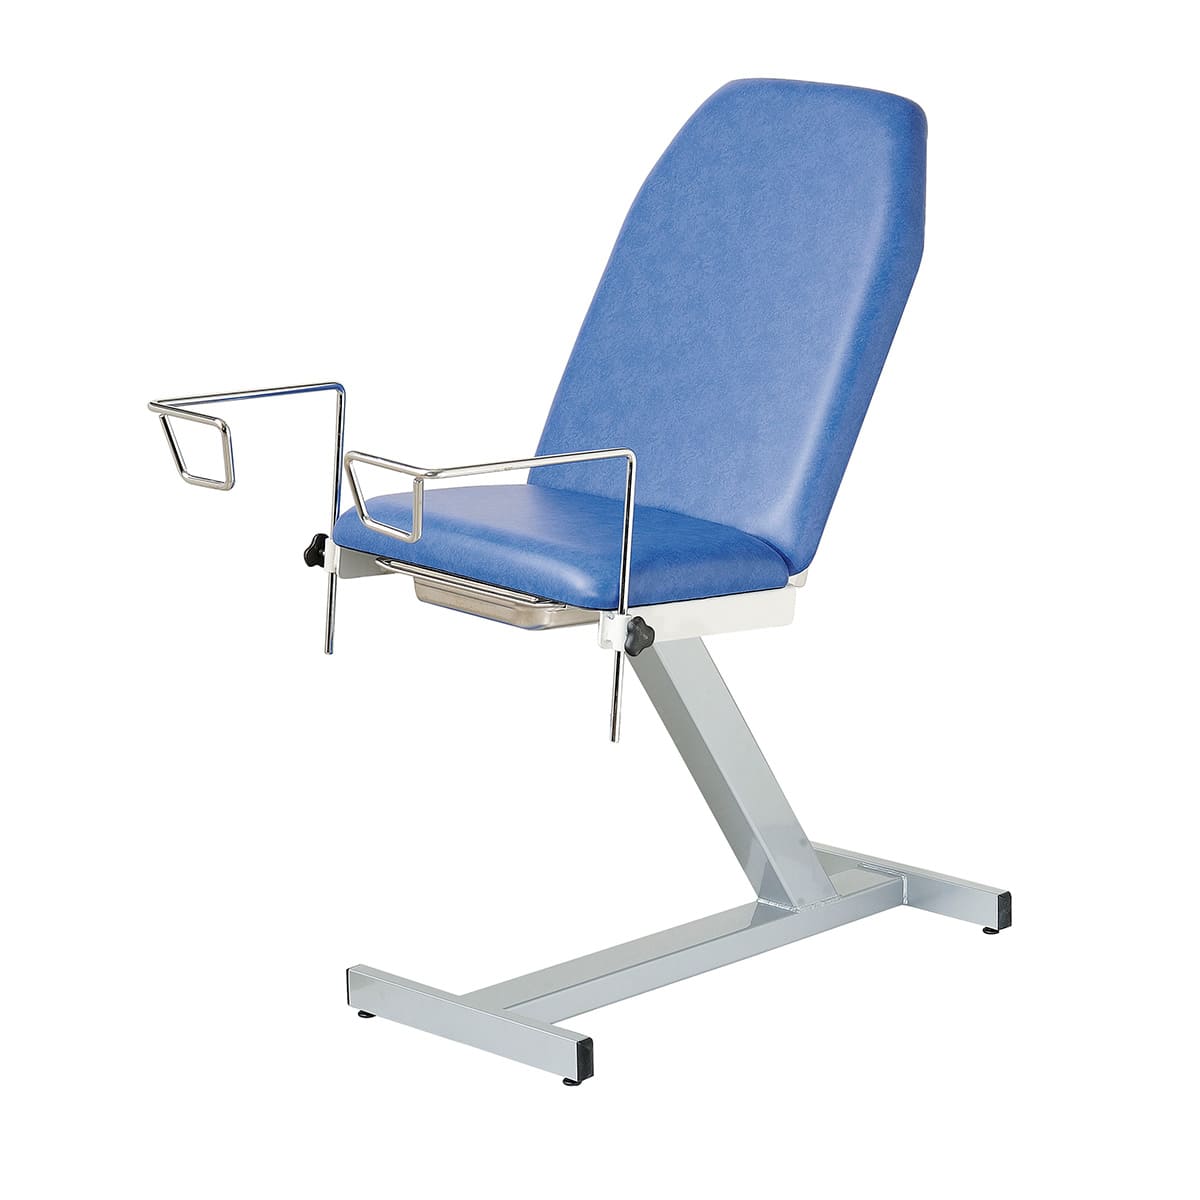 Gynaecological chair 2 sections, with stirrups